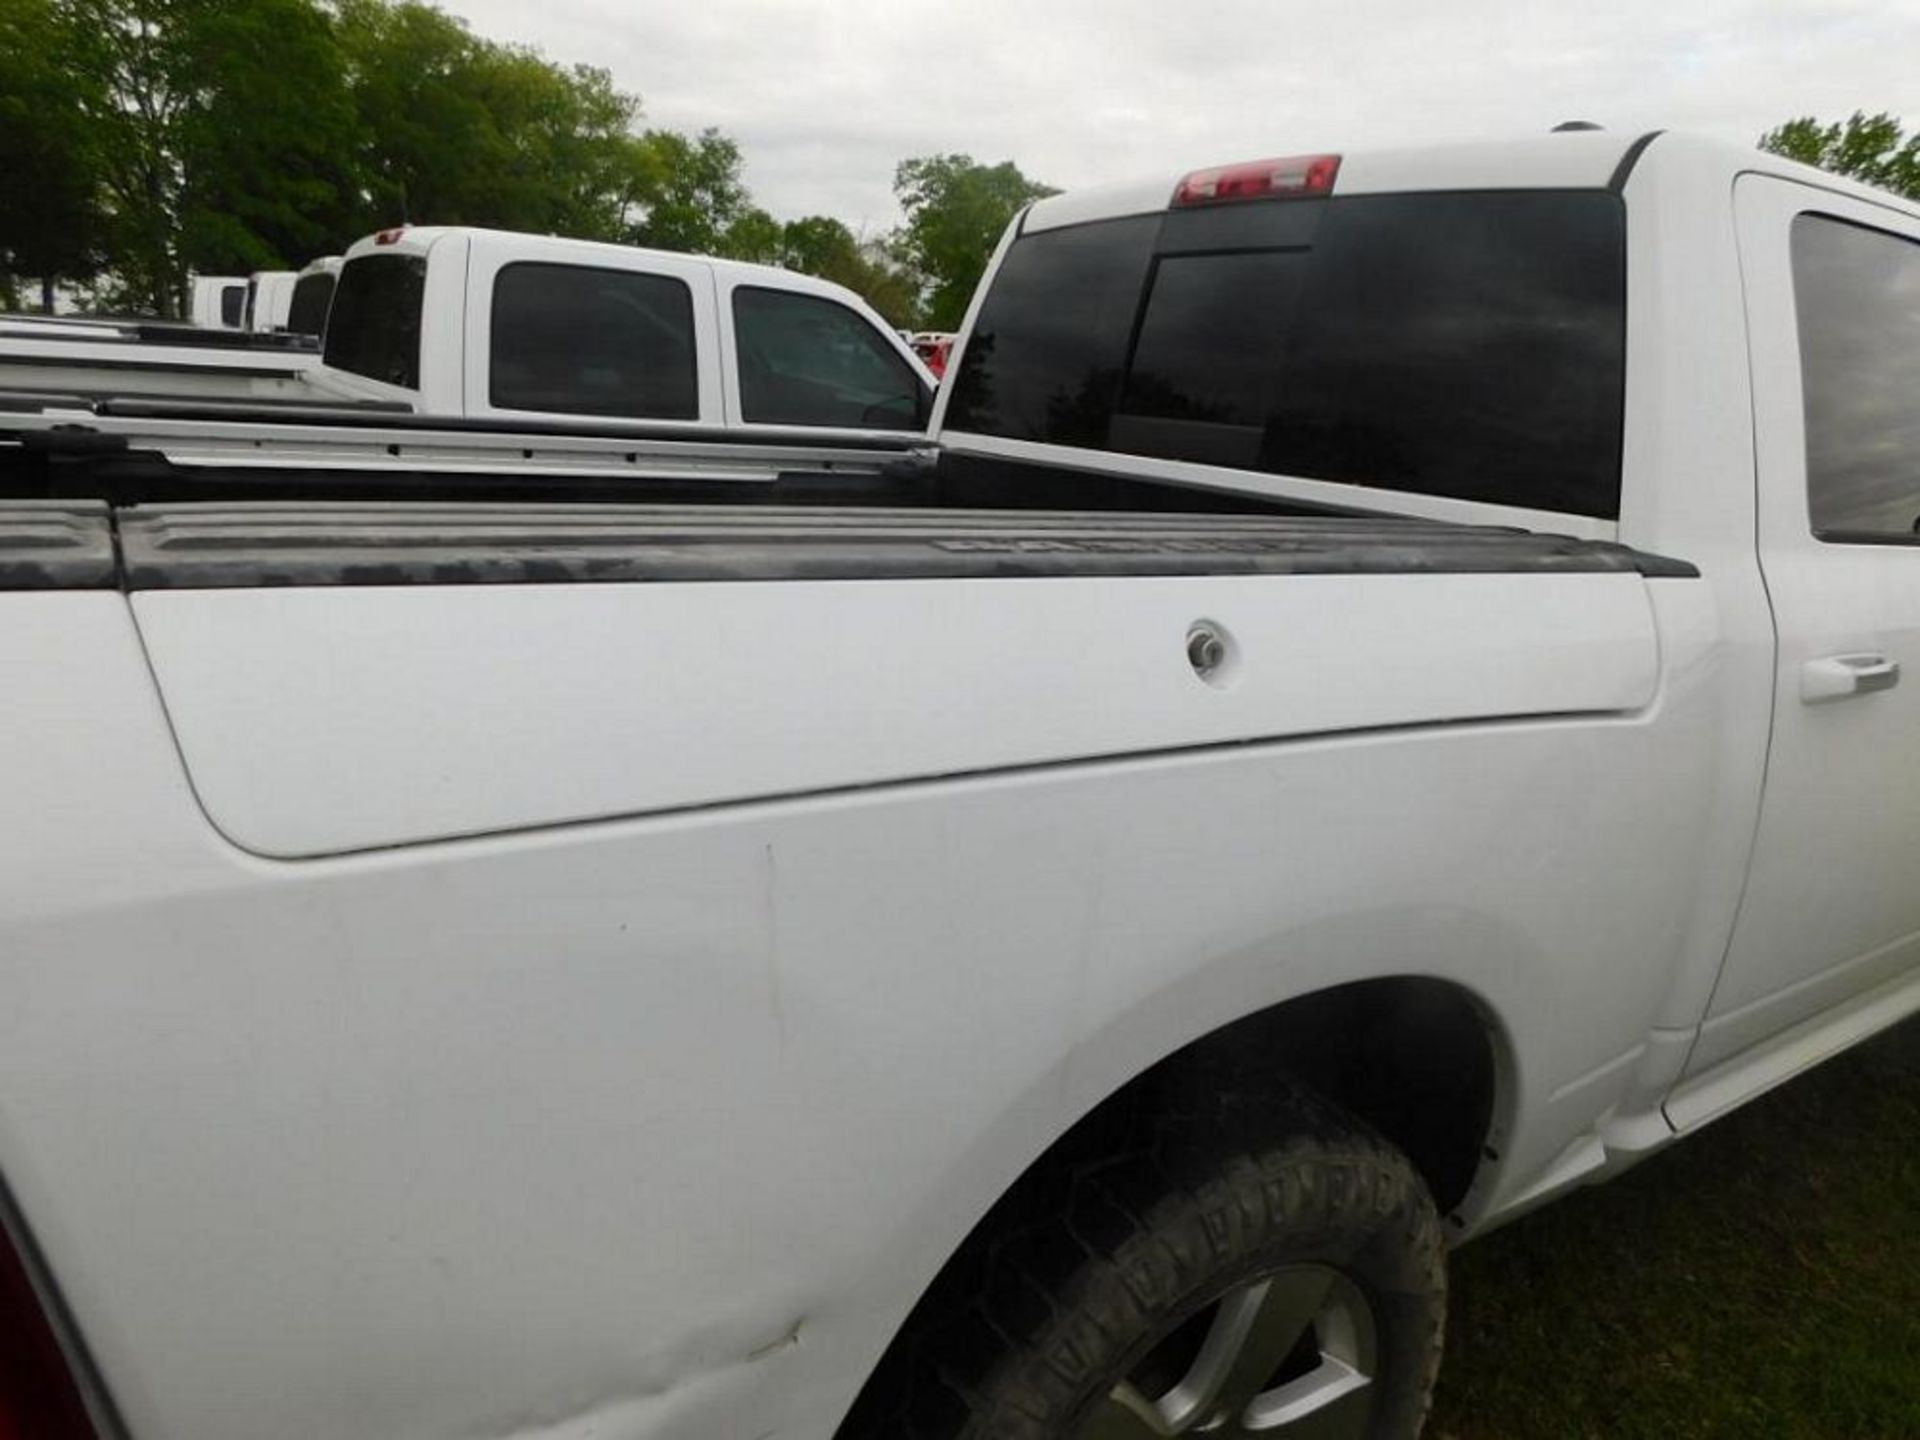 2012 Dodge Ram 1500 4x4 Crew Cab Pick-up Truck, VIN 1C6RD7LT3CS209341, 5-1/2 ft. Bed with Integral T - Image 5 of 5